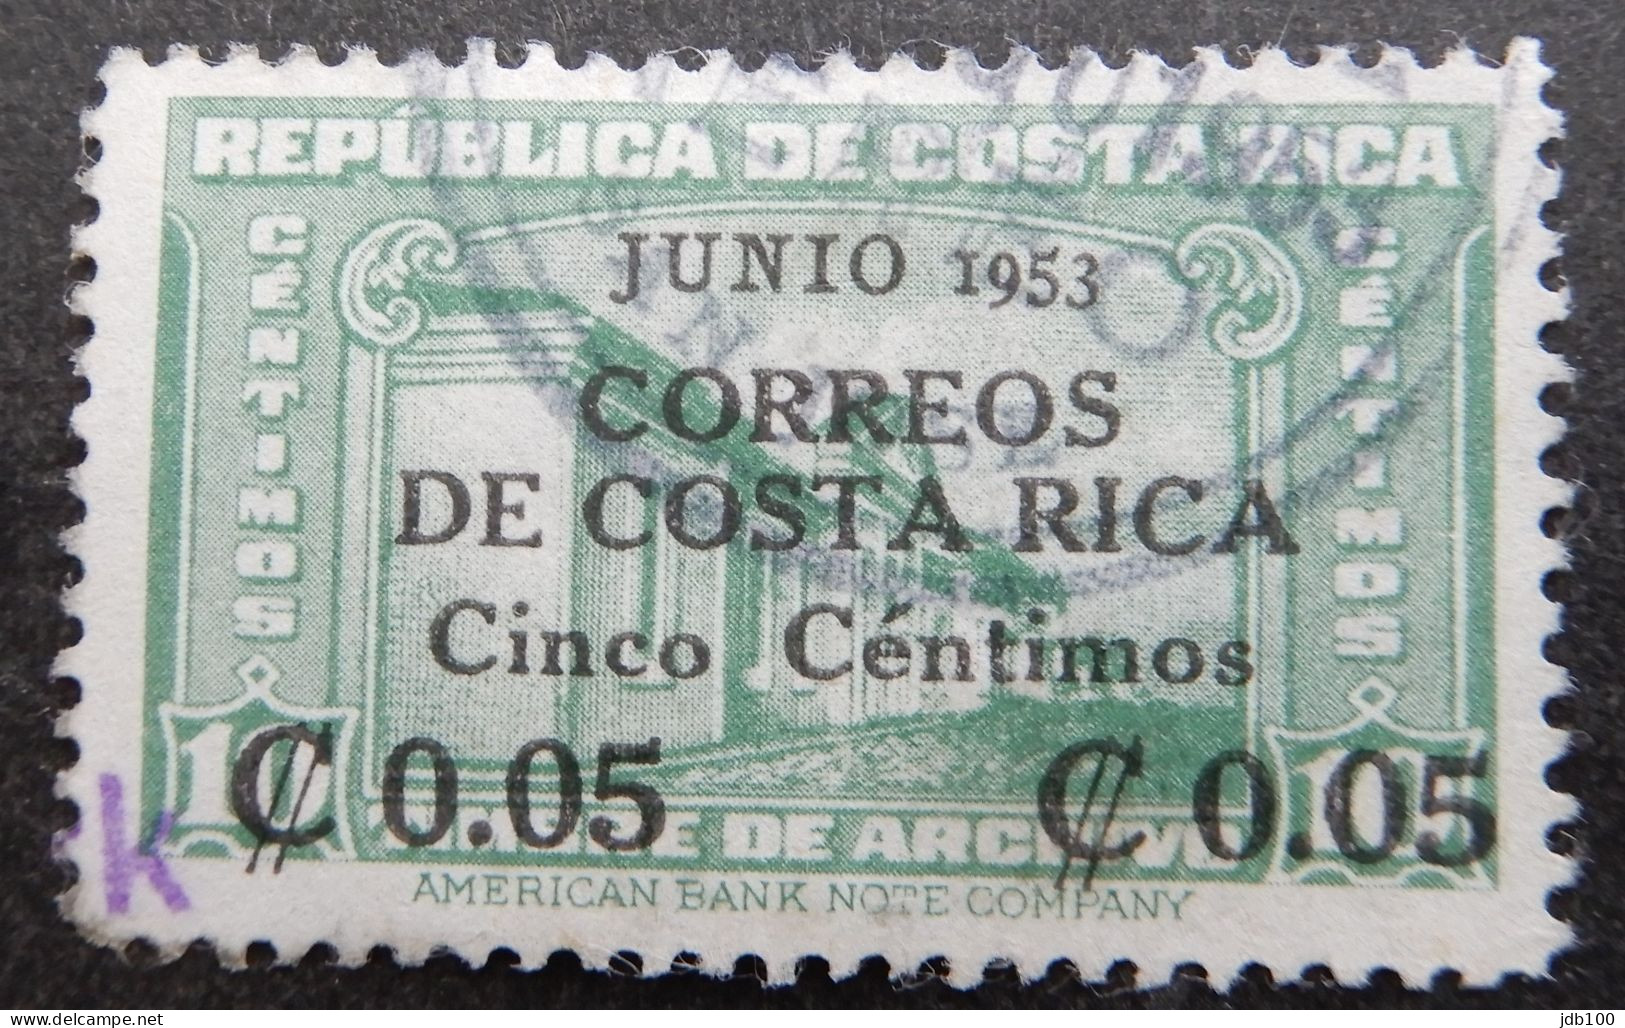 Costa Rica 1953 (1) Fiscal Stamp Surcharged Junio 1953 - Costa Rica